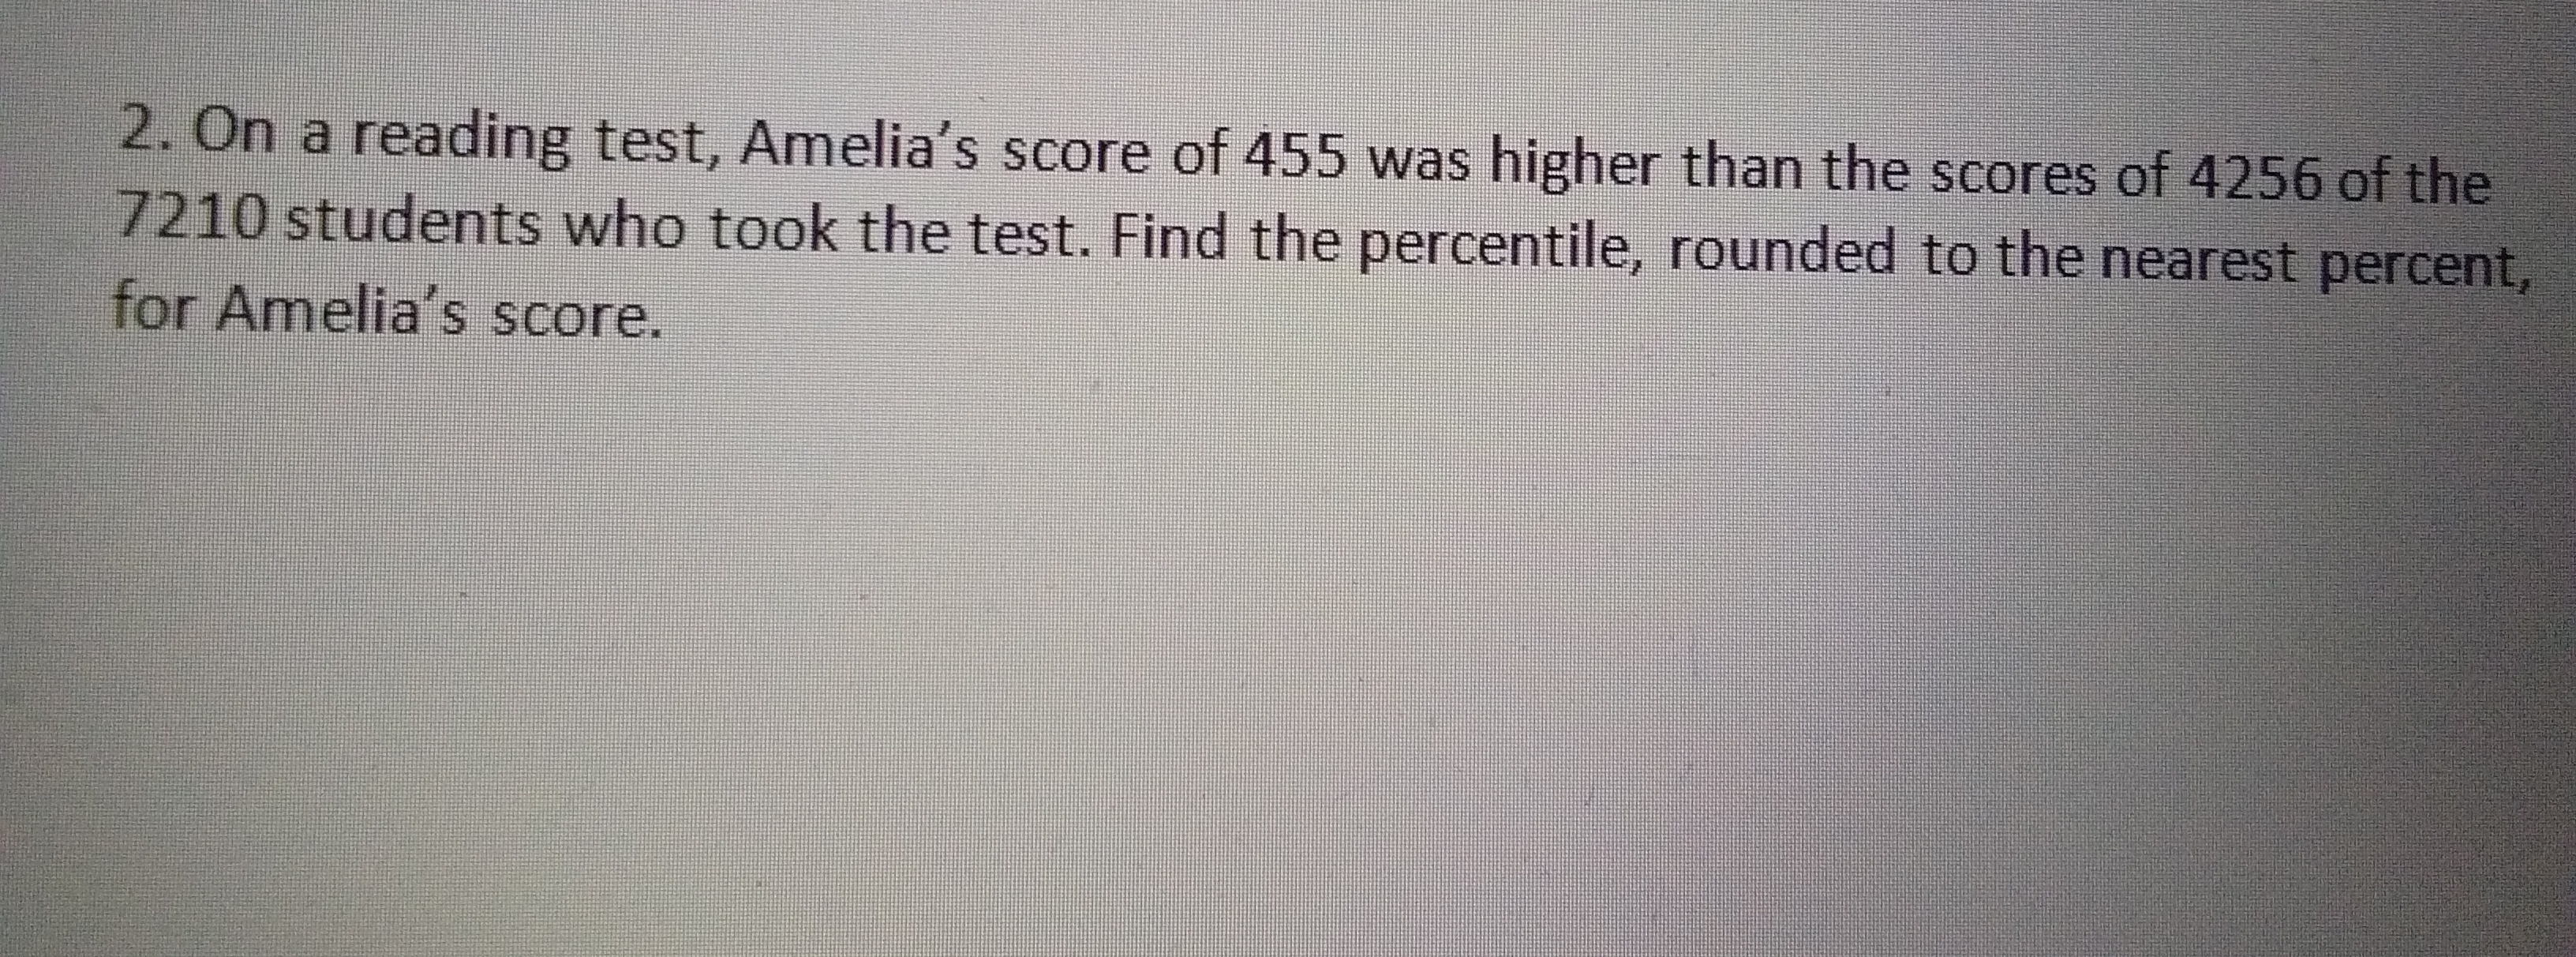 2. On a reading test, Amelia's score of 455 was higher than the scores of 4256 of the
7210 students who took the test. Find the percentile, rounded to the nearest percent,
for Amelia's score.
